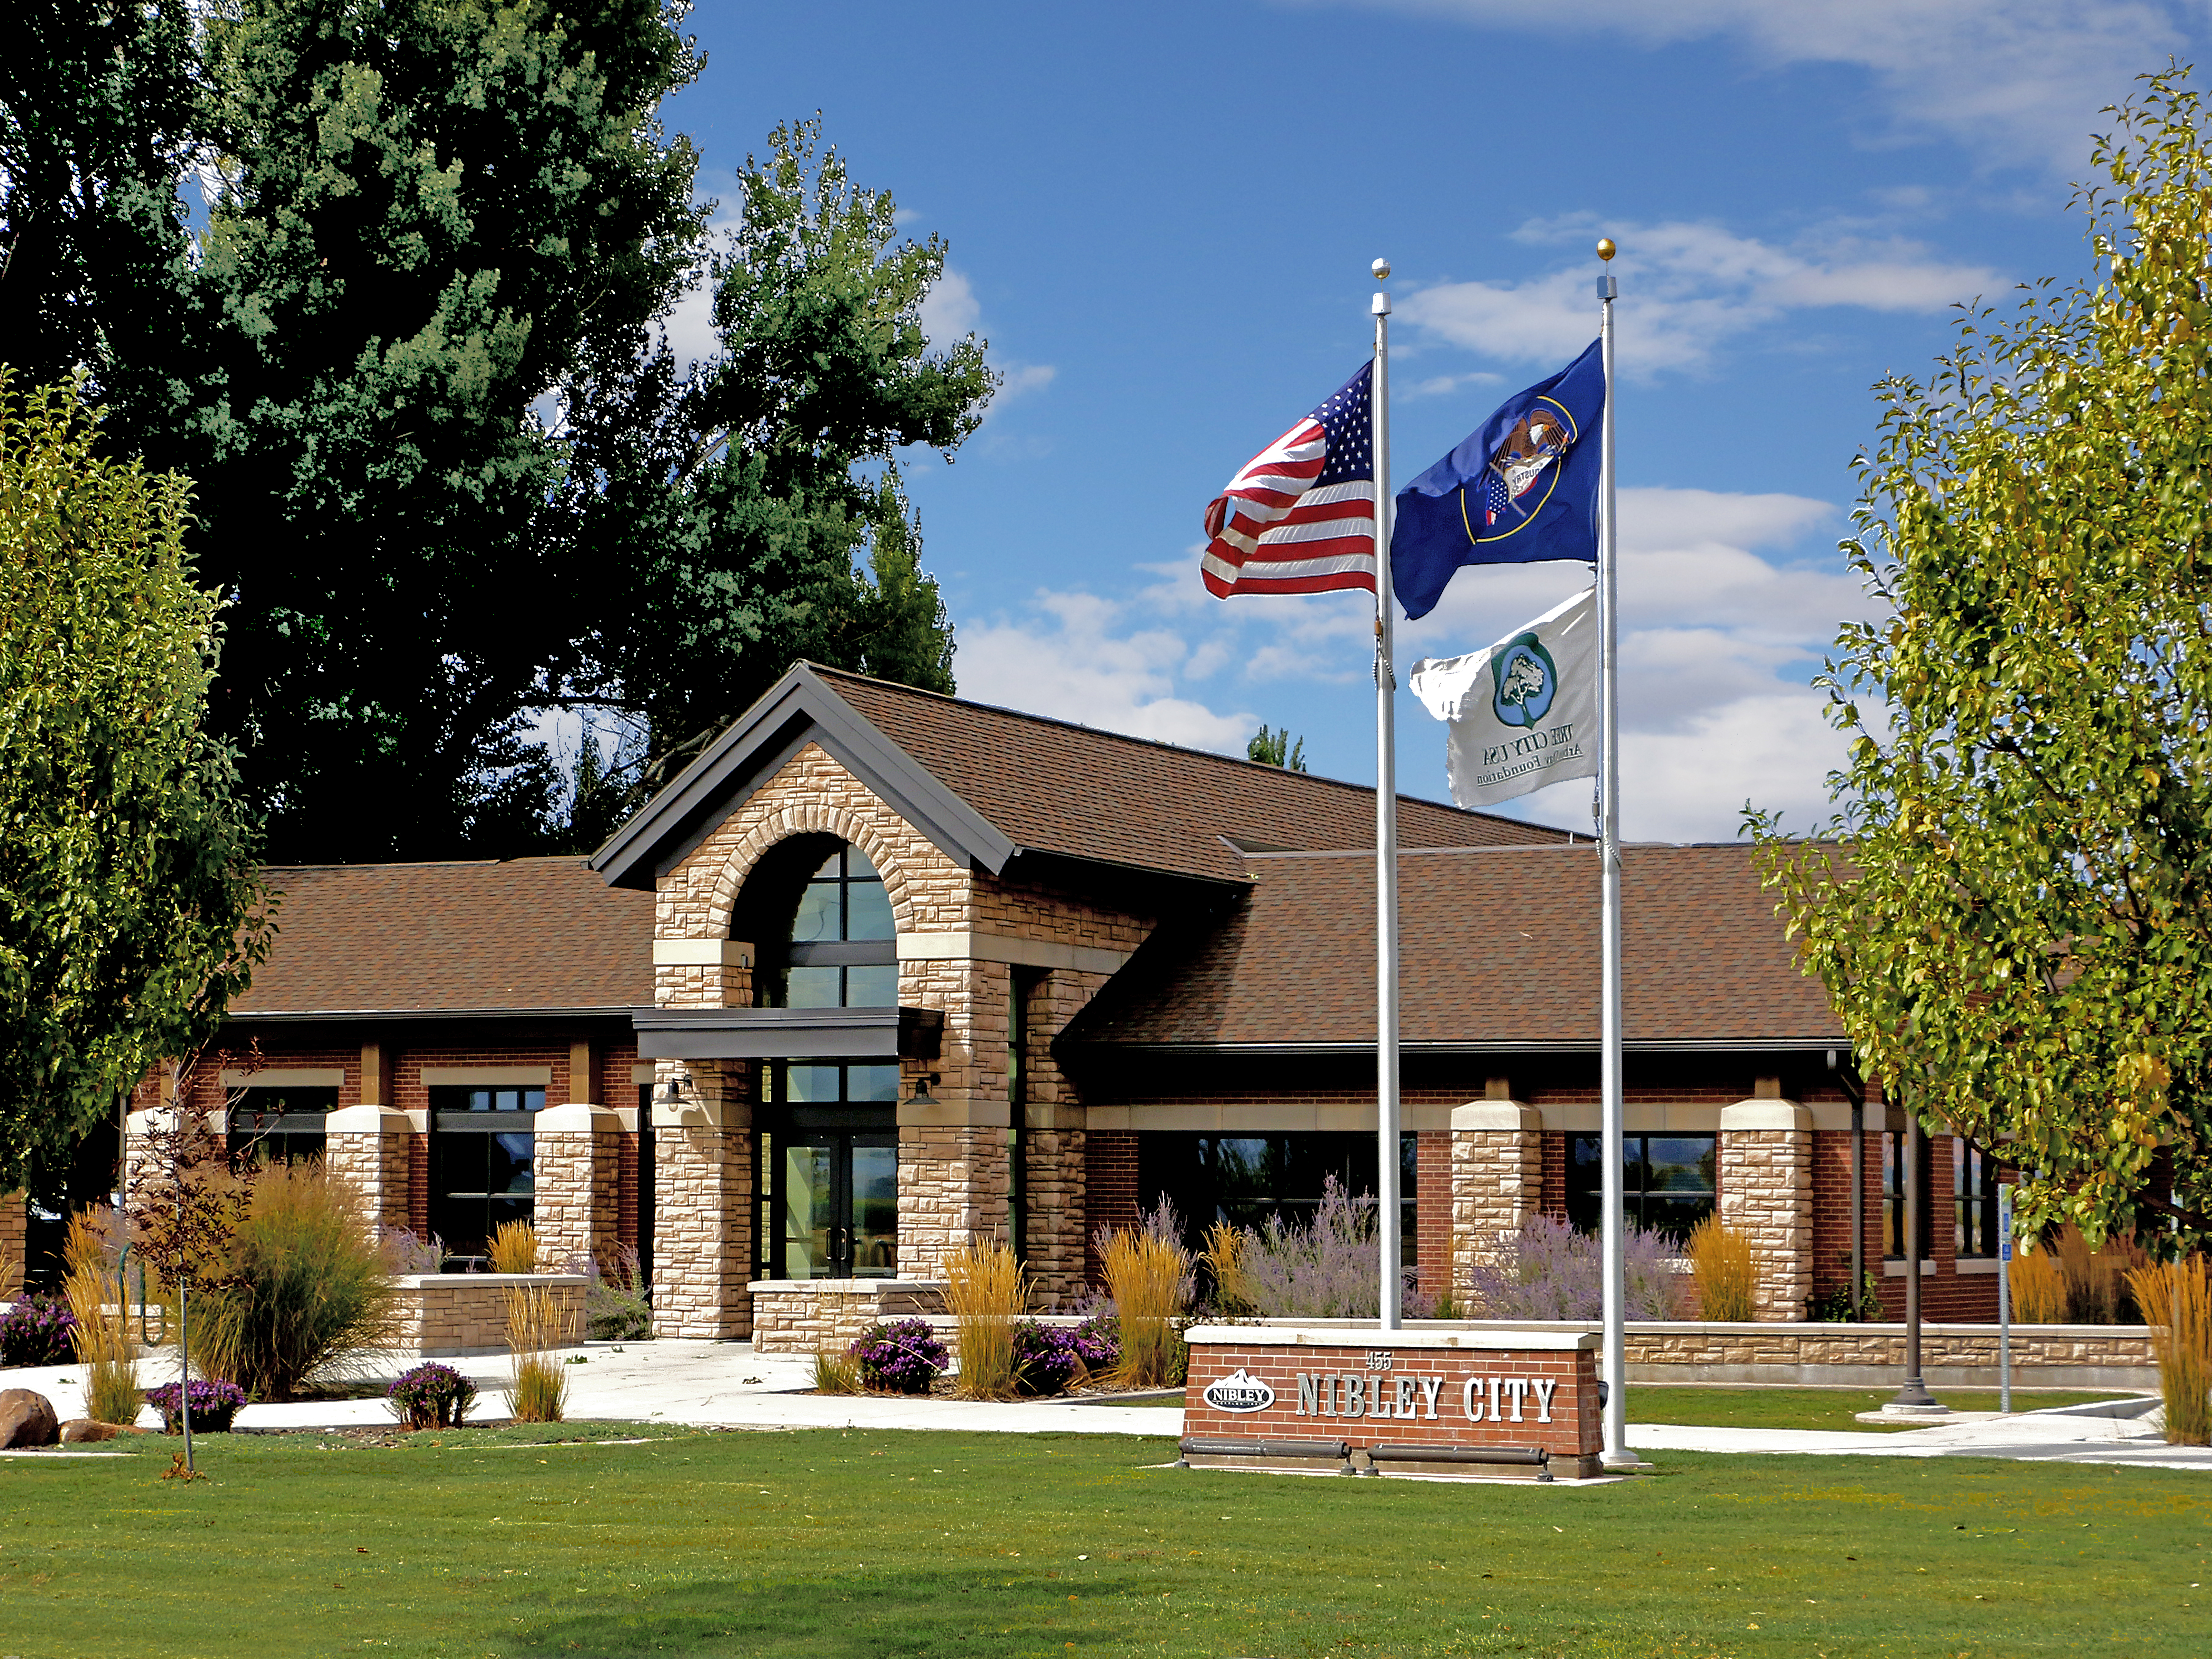 Nibley City Office Flags